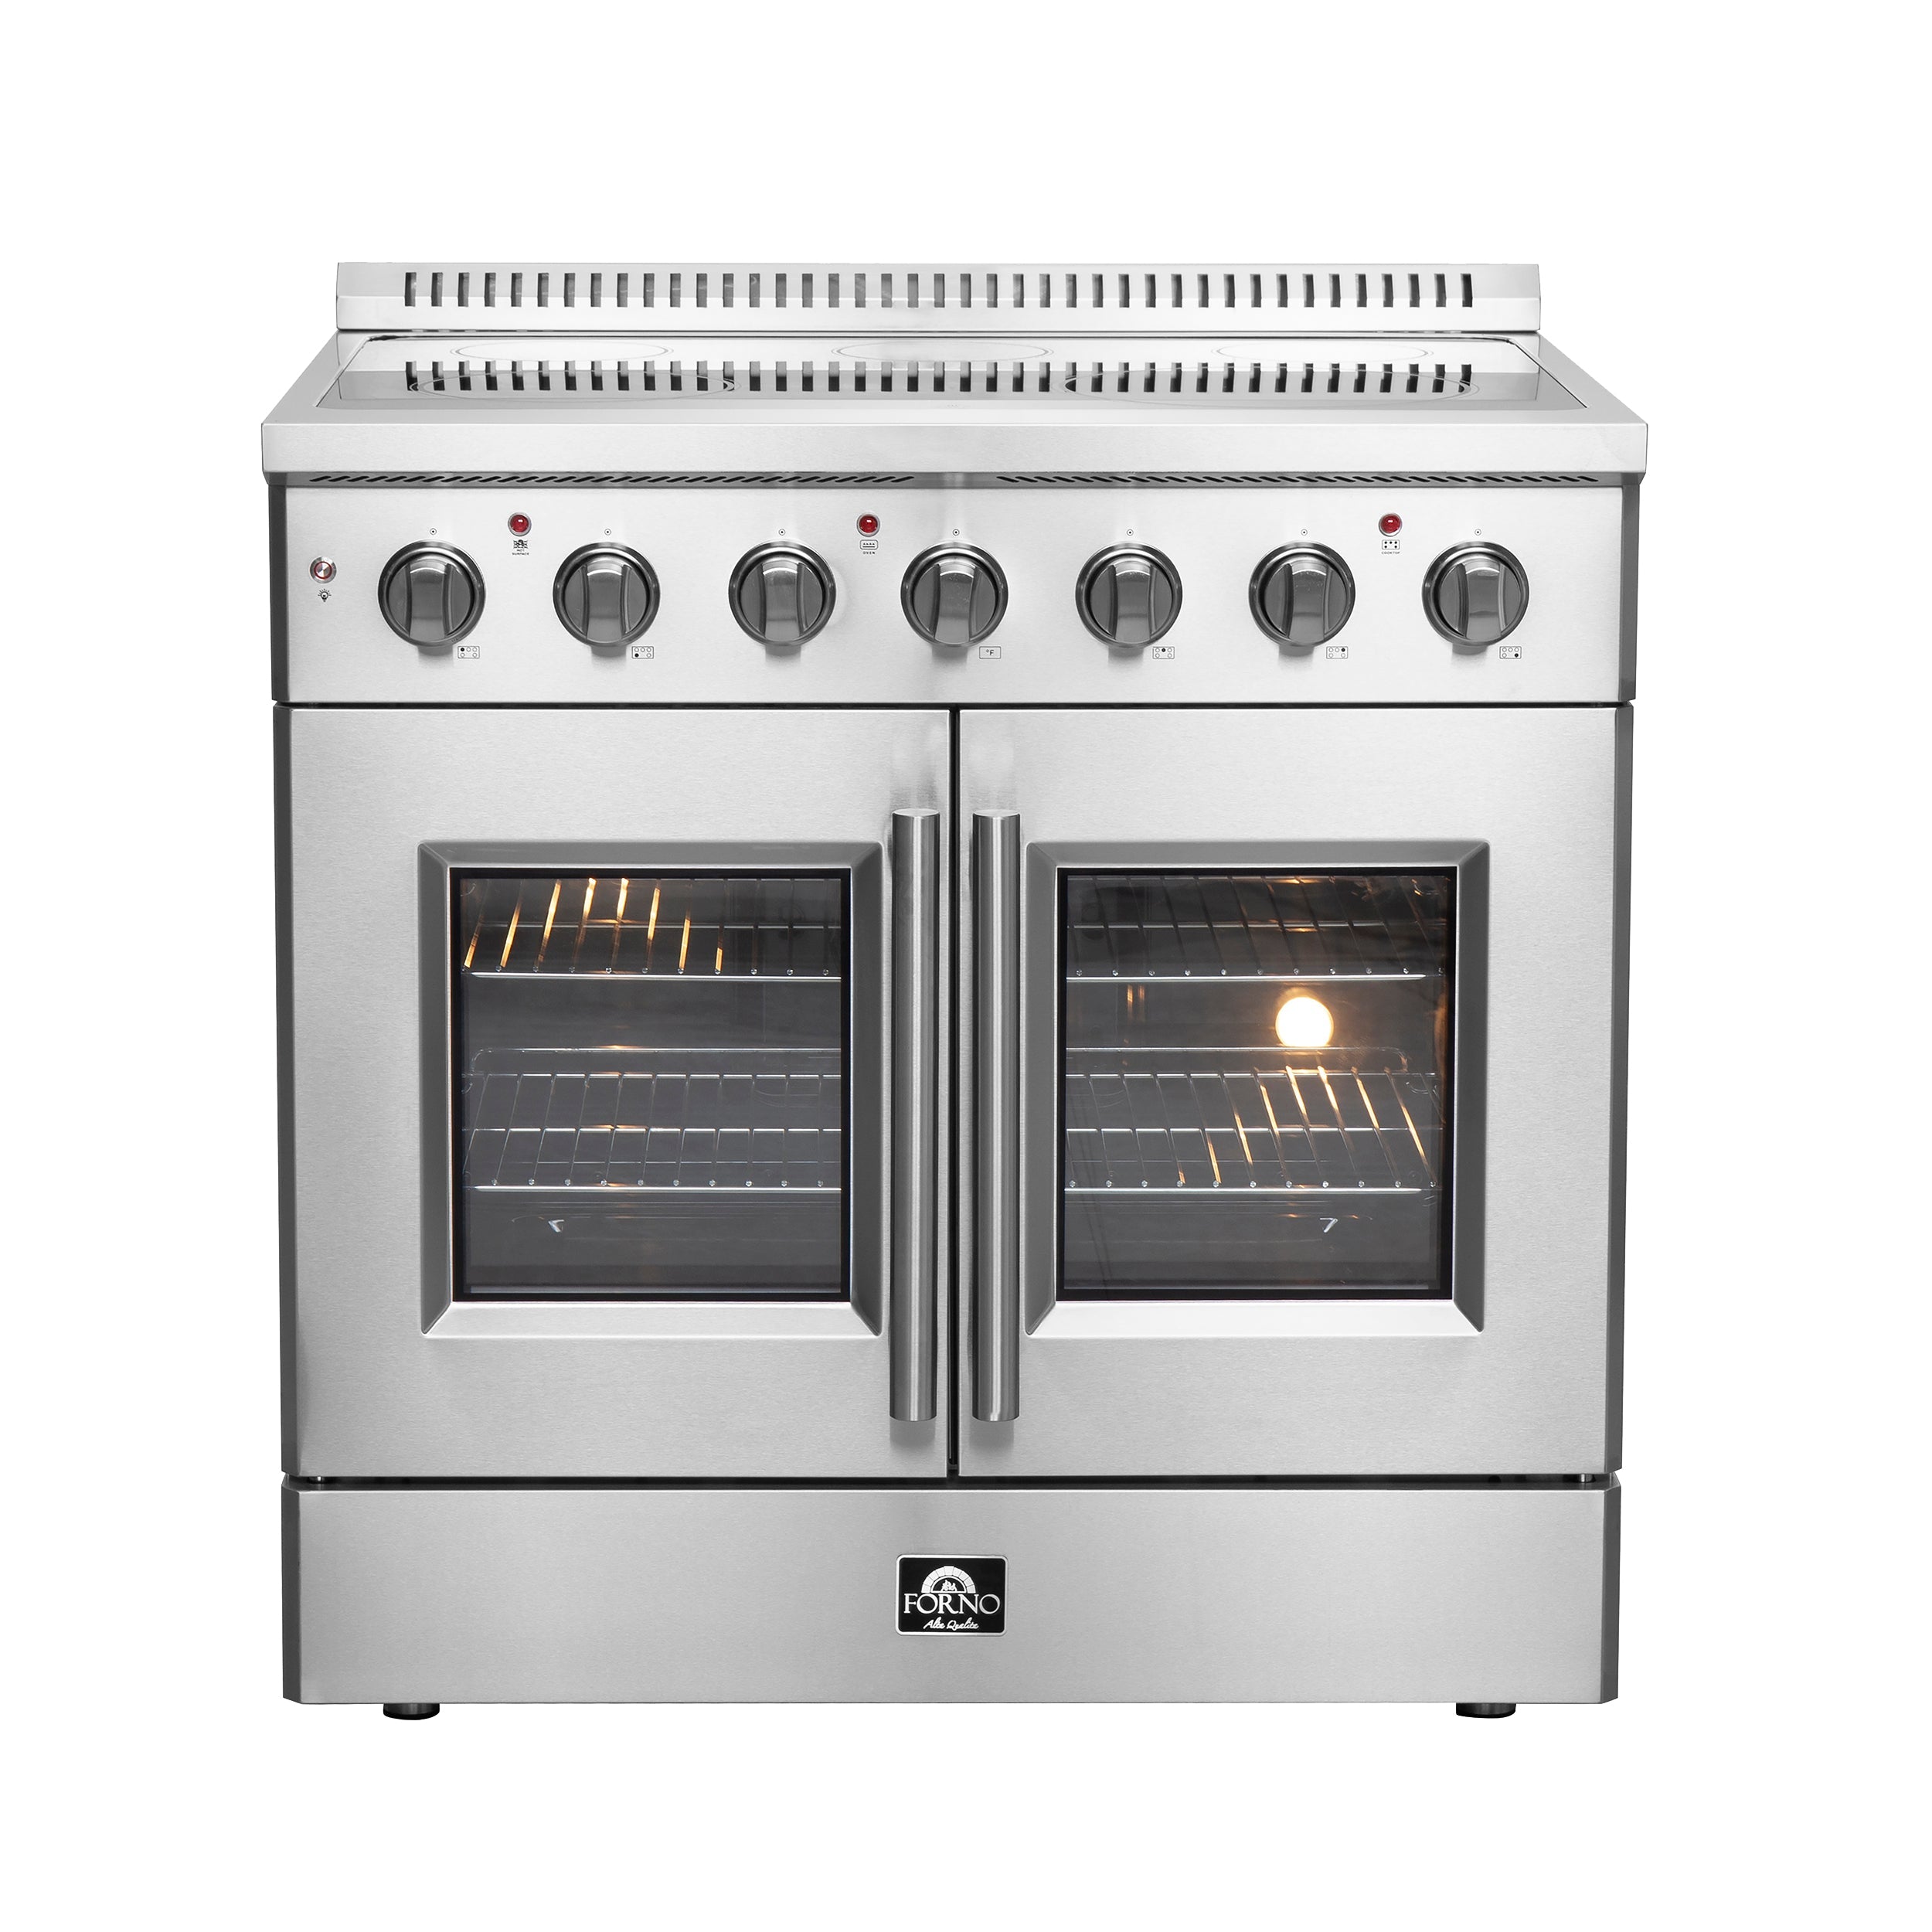 Forno Galiano 36 in. 5.36 cu. ft. French Door Freestanding All Electric Range in Stainless Steel (FFSEL6917-36) front.